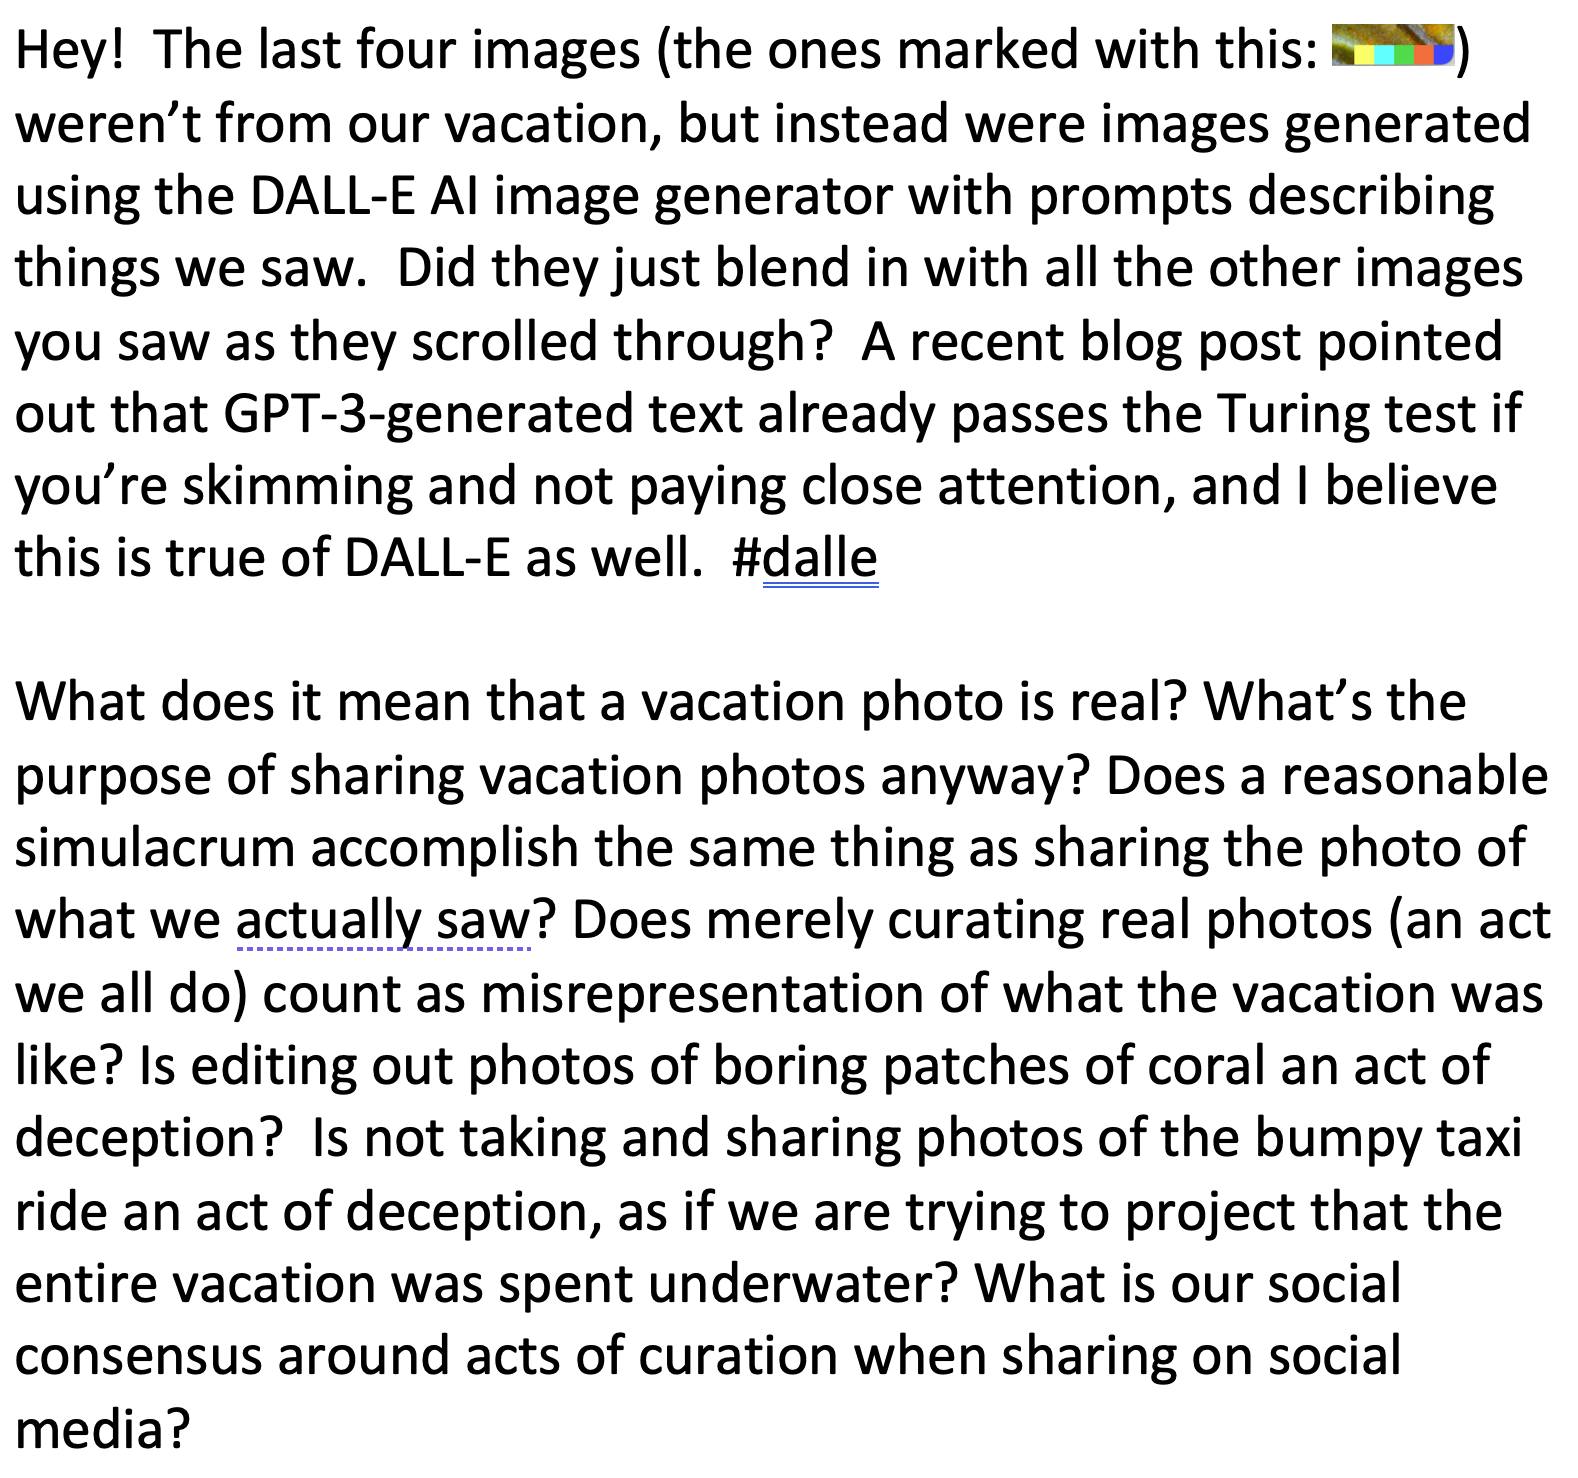 My deepfake DALL-E 2 vacation photos passed the Turing Test